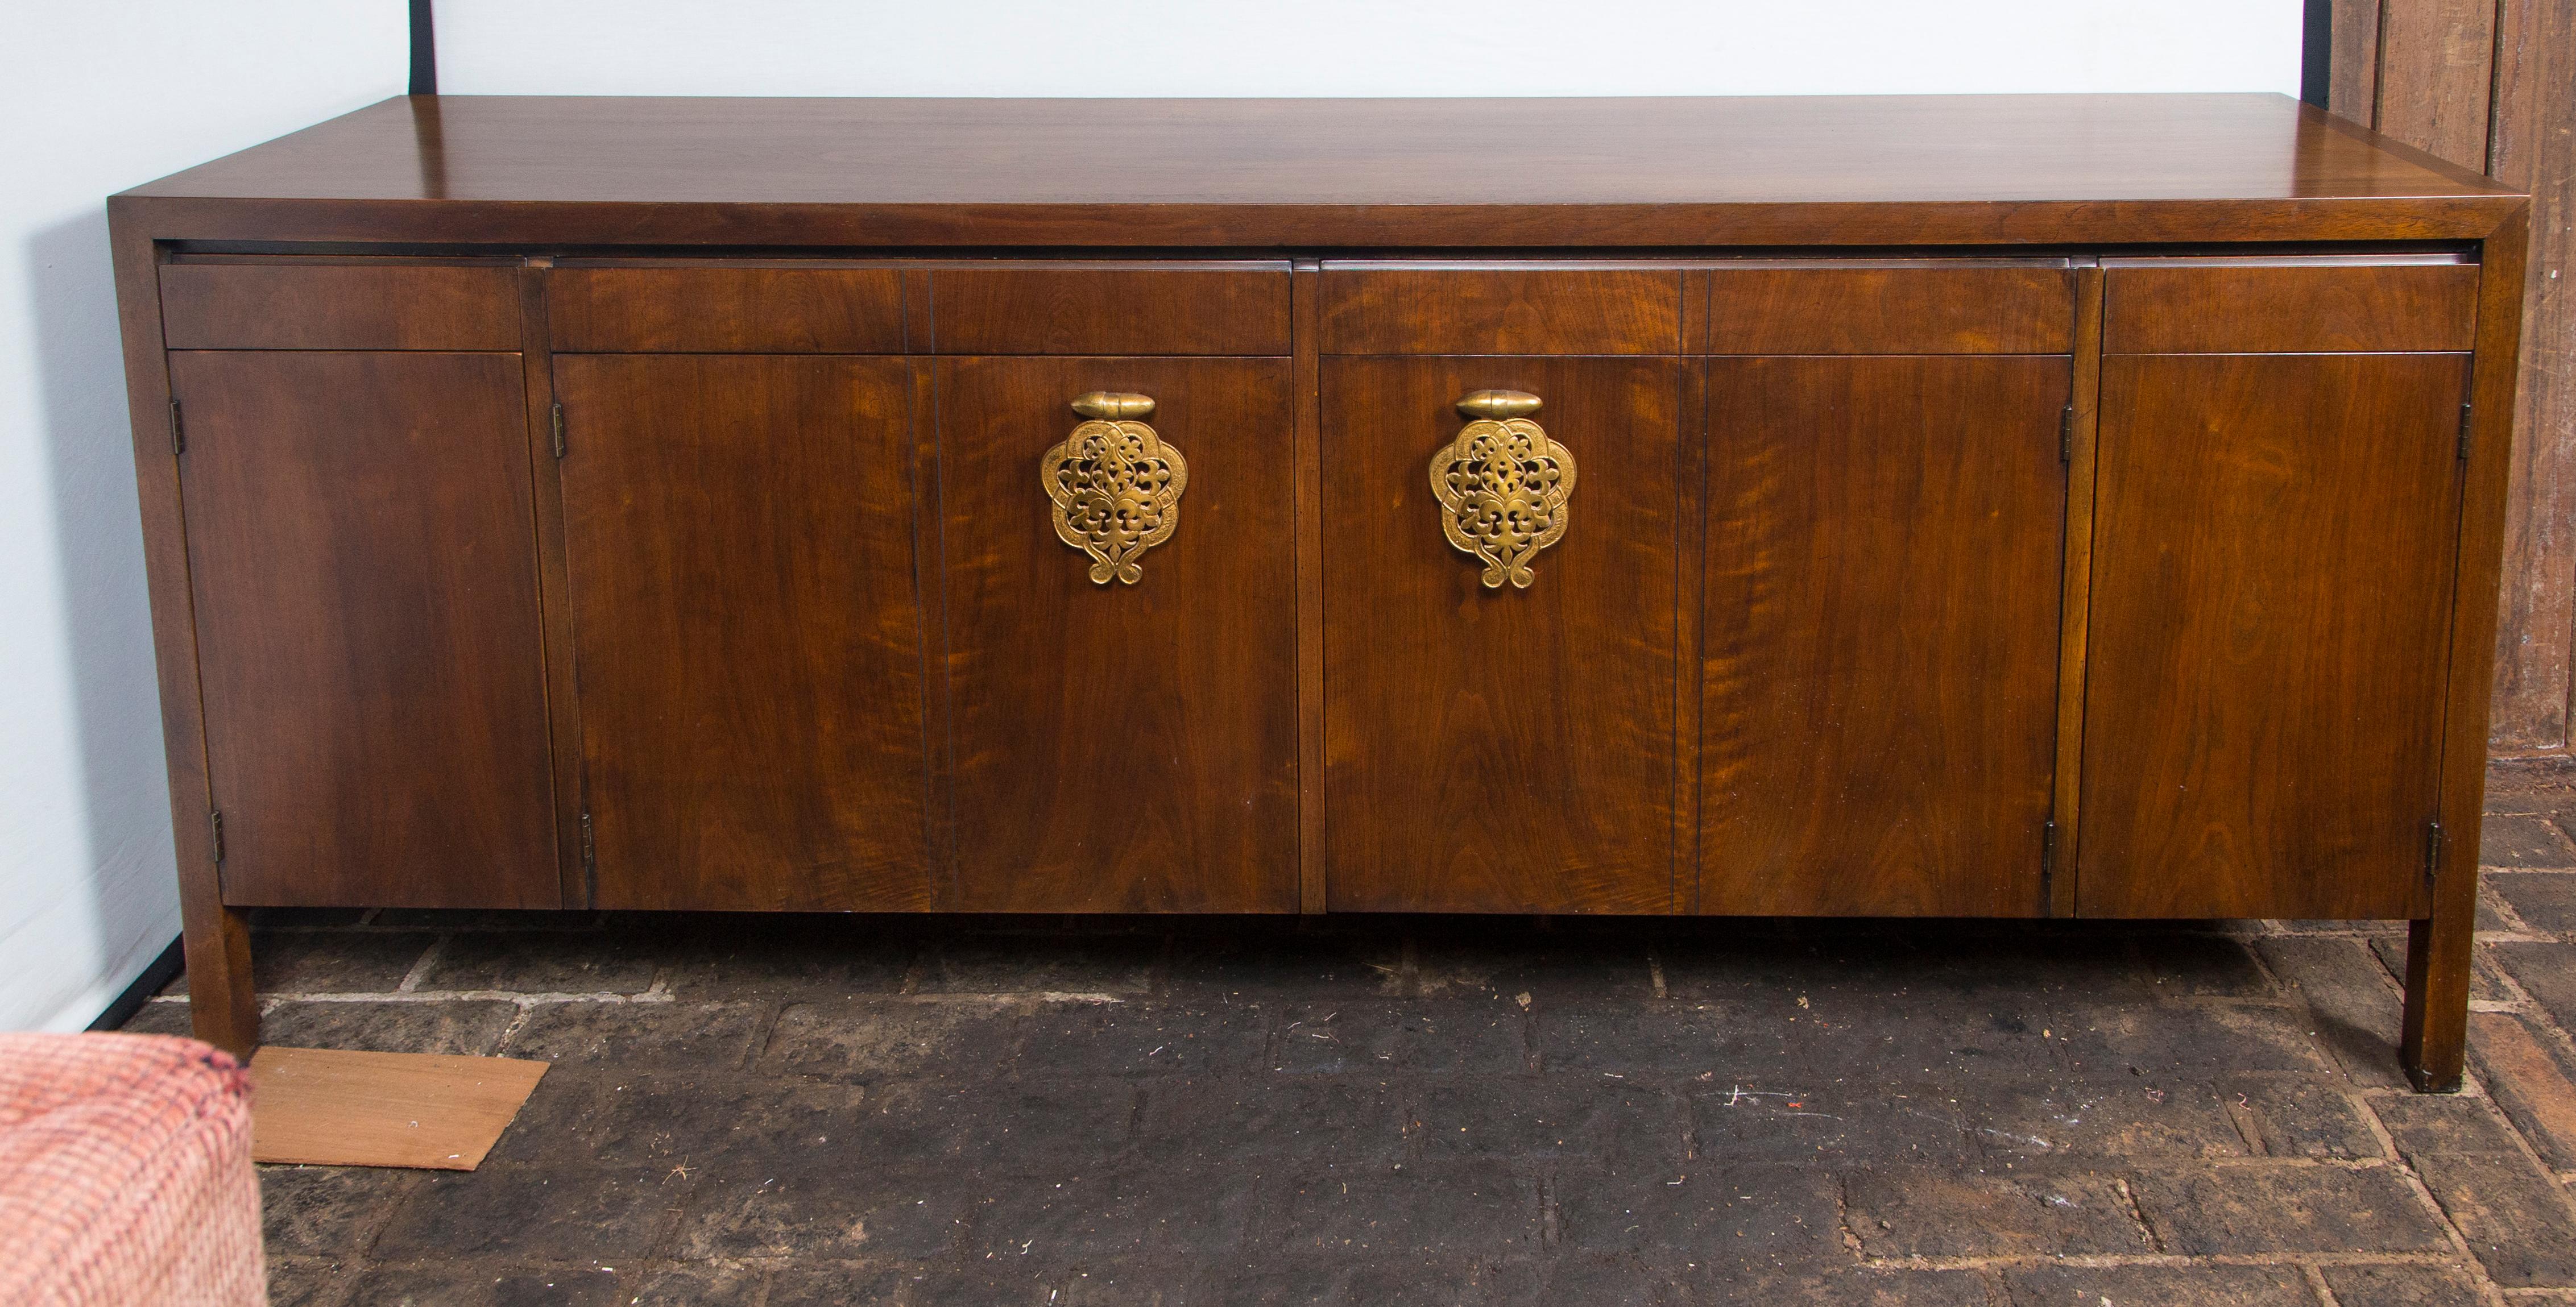 Bert England Asian Style Mid-Century Modern walnut sideboard or credenza. Manufactured by Johnson Furniture Co. Four flush drawers above the doors. A pair of large filigree Asian pulls on center doors.